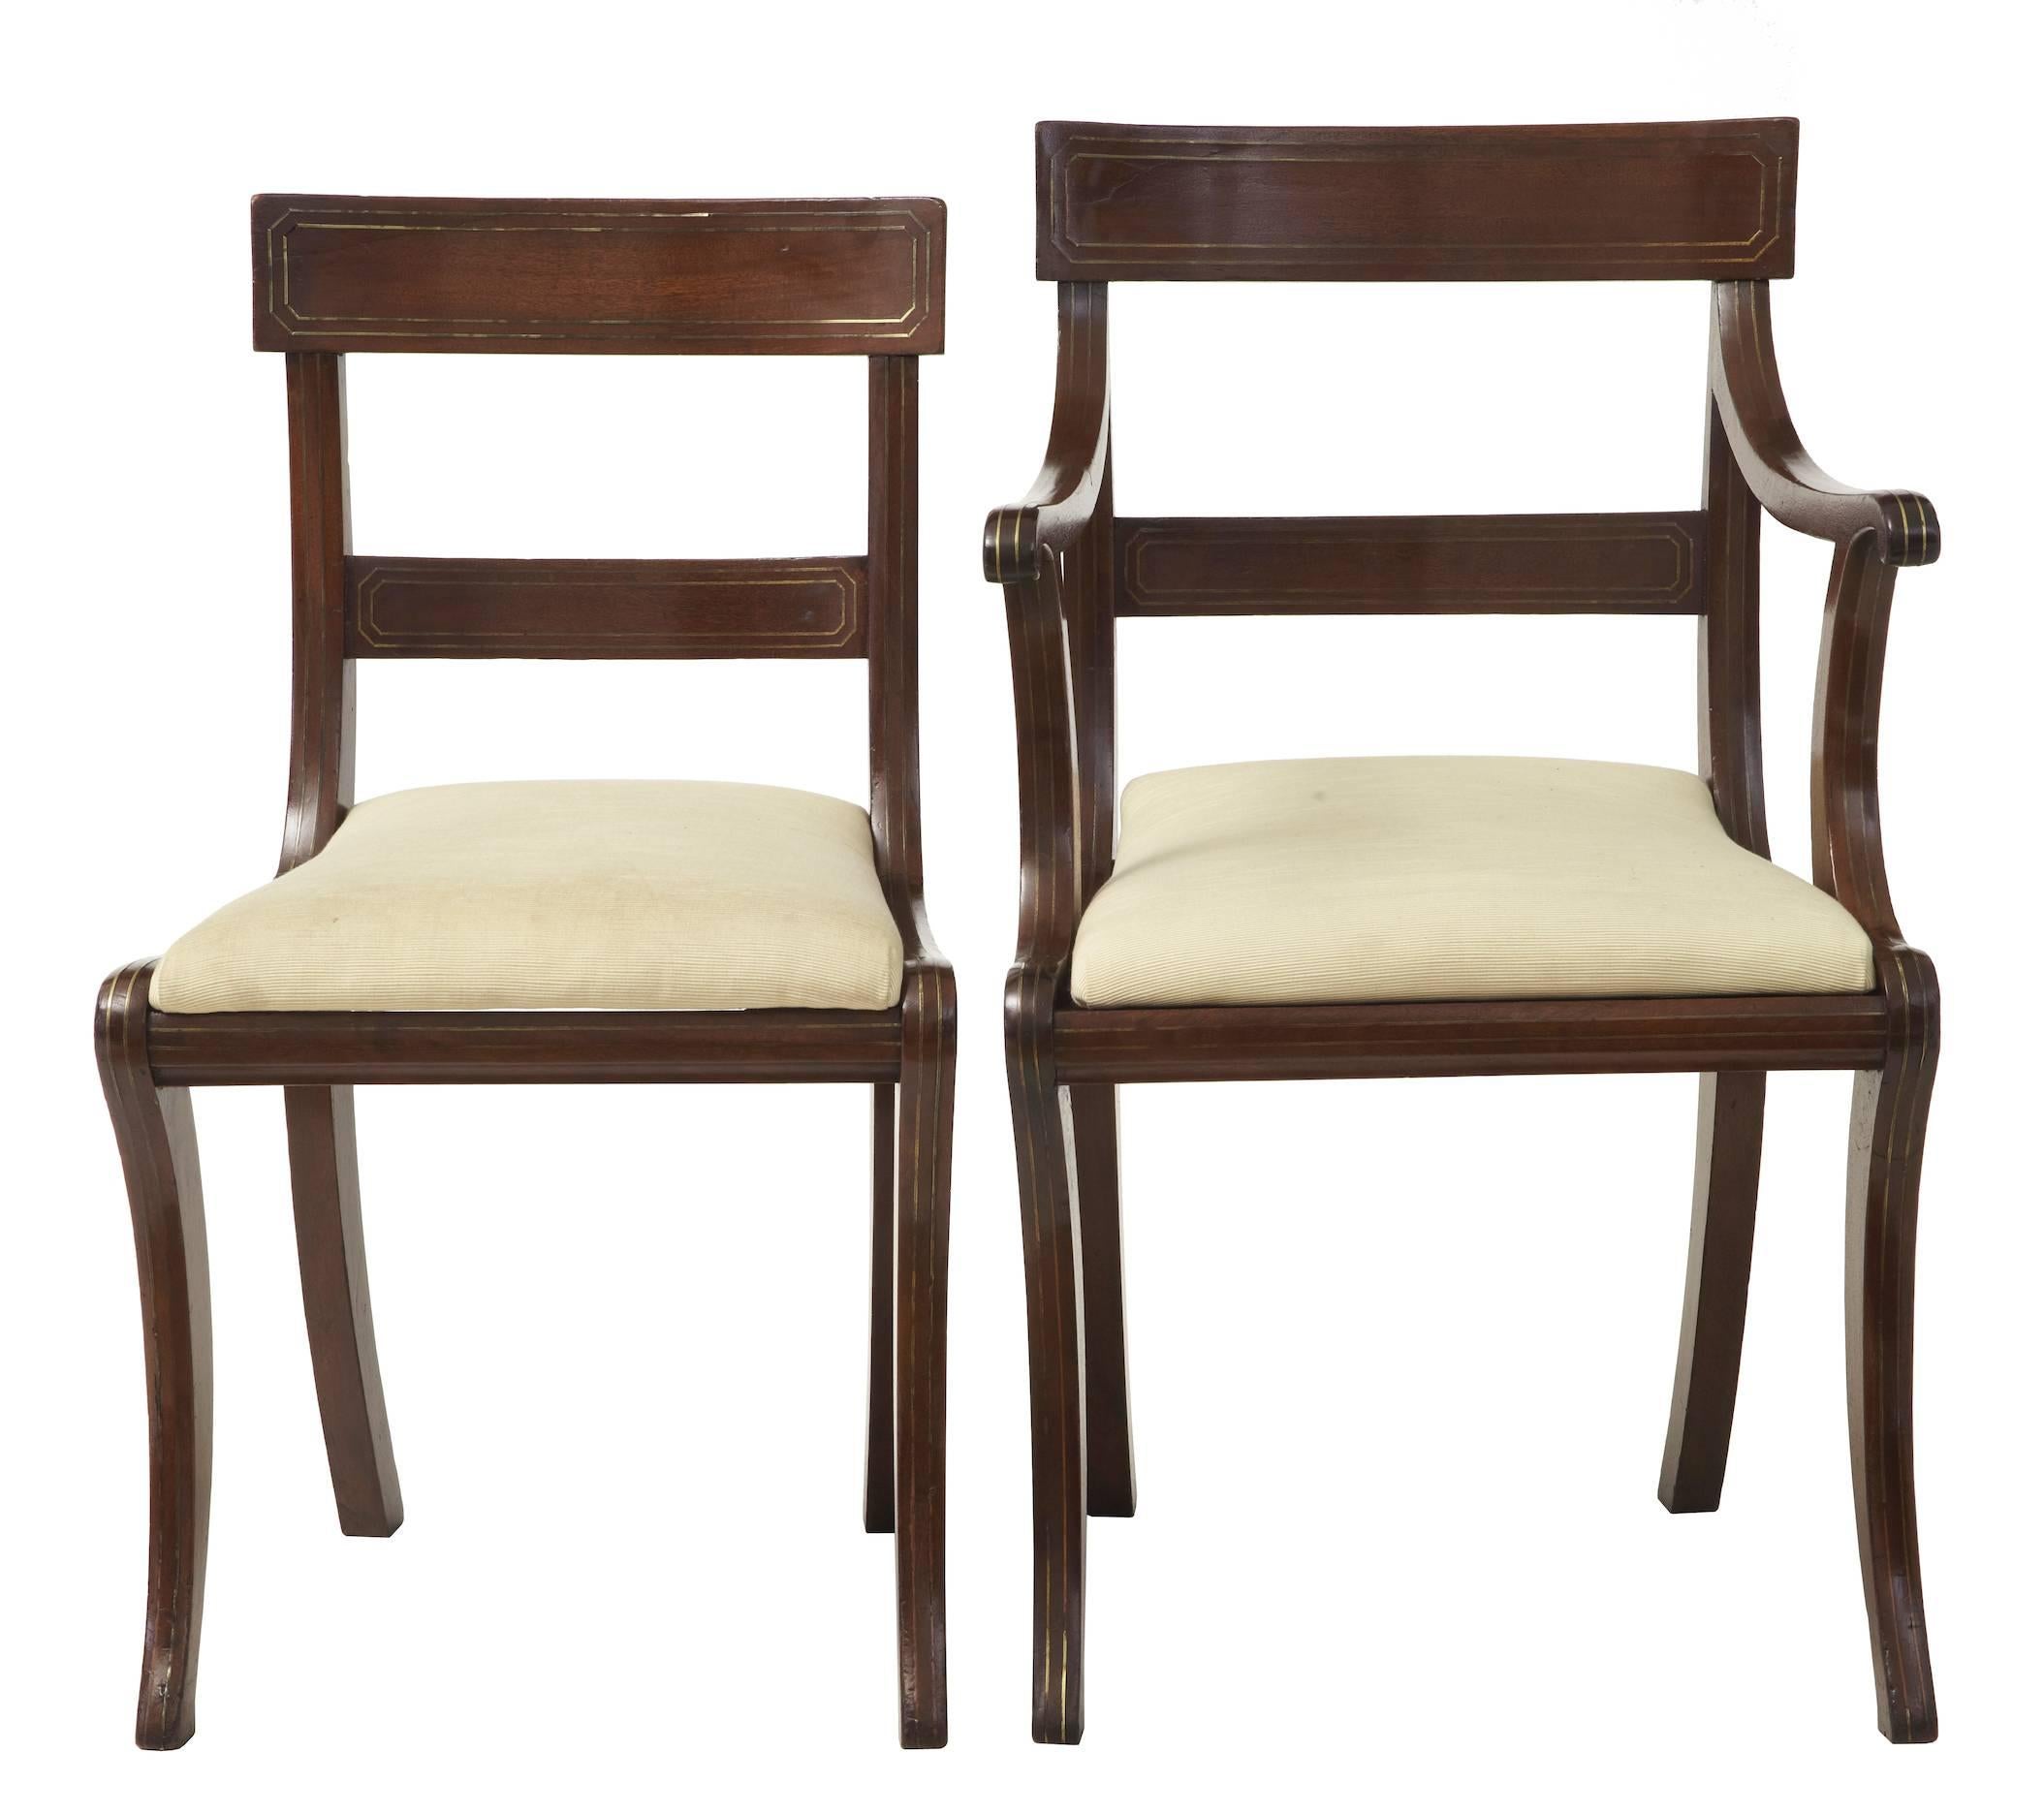 Good quality set of chairs, circa 1920.
Made in the Regency taste with scrolled arms, shaped backs.
Inlaid with double brass lines to all front facing surfaces.
Some minor losses to brass and replacements.

Armchair measurements:
Height